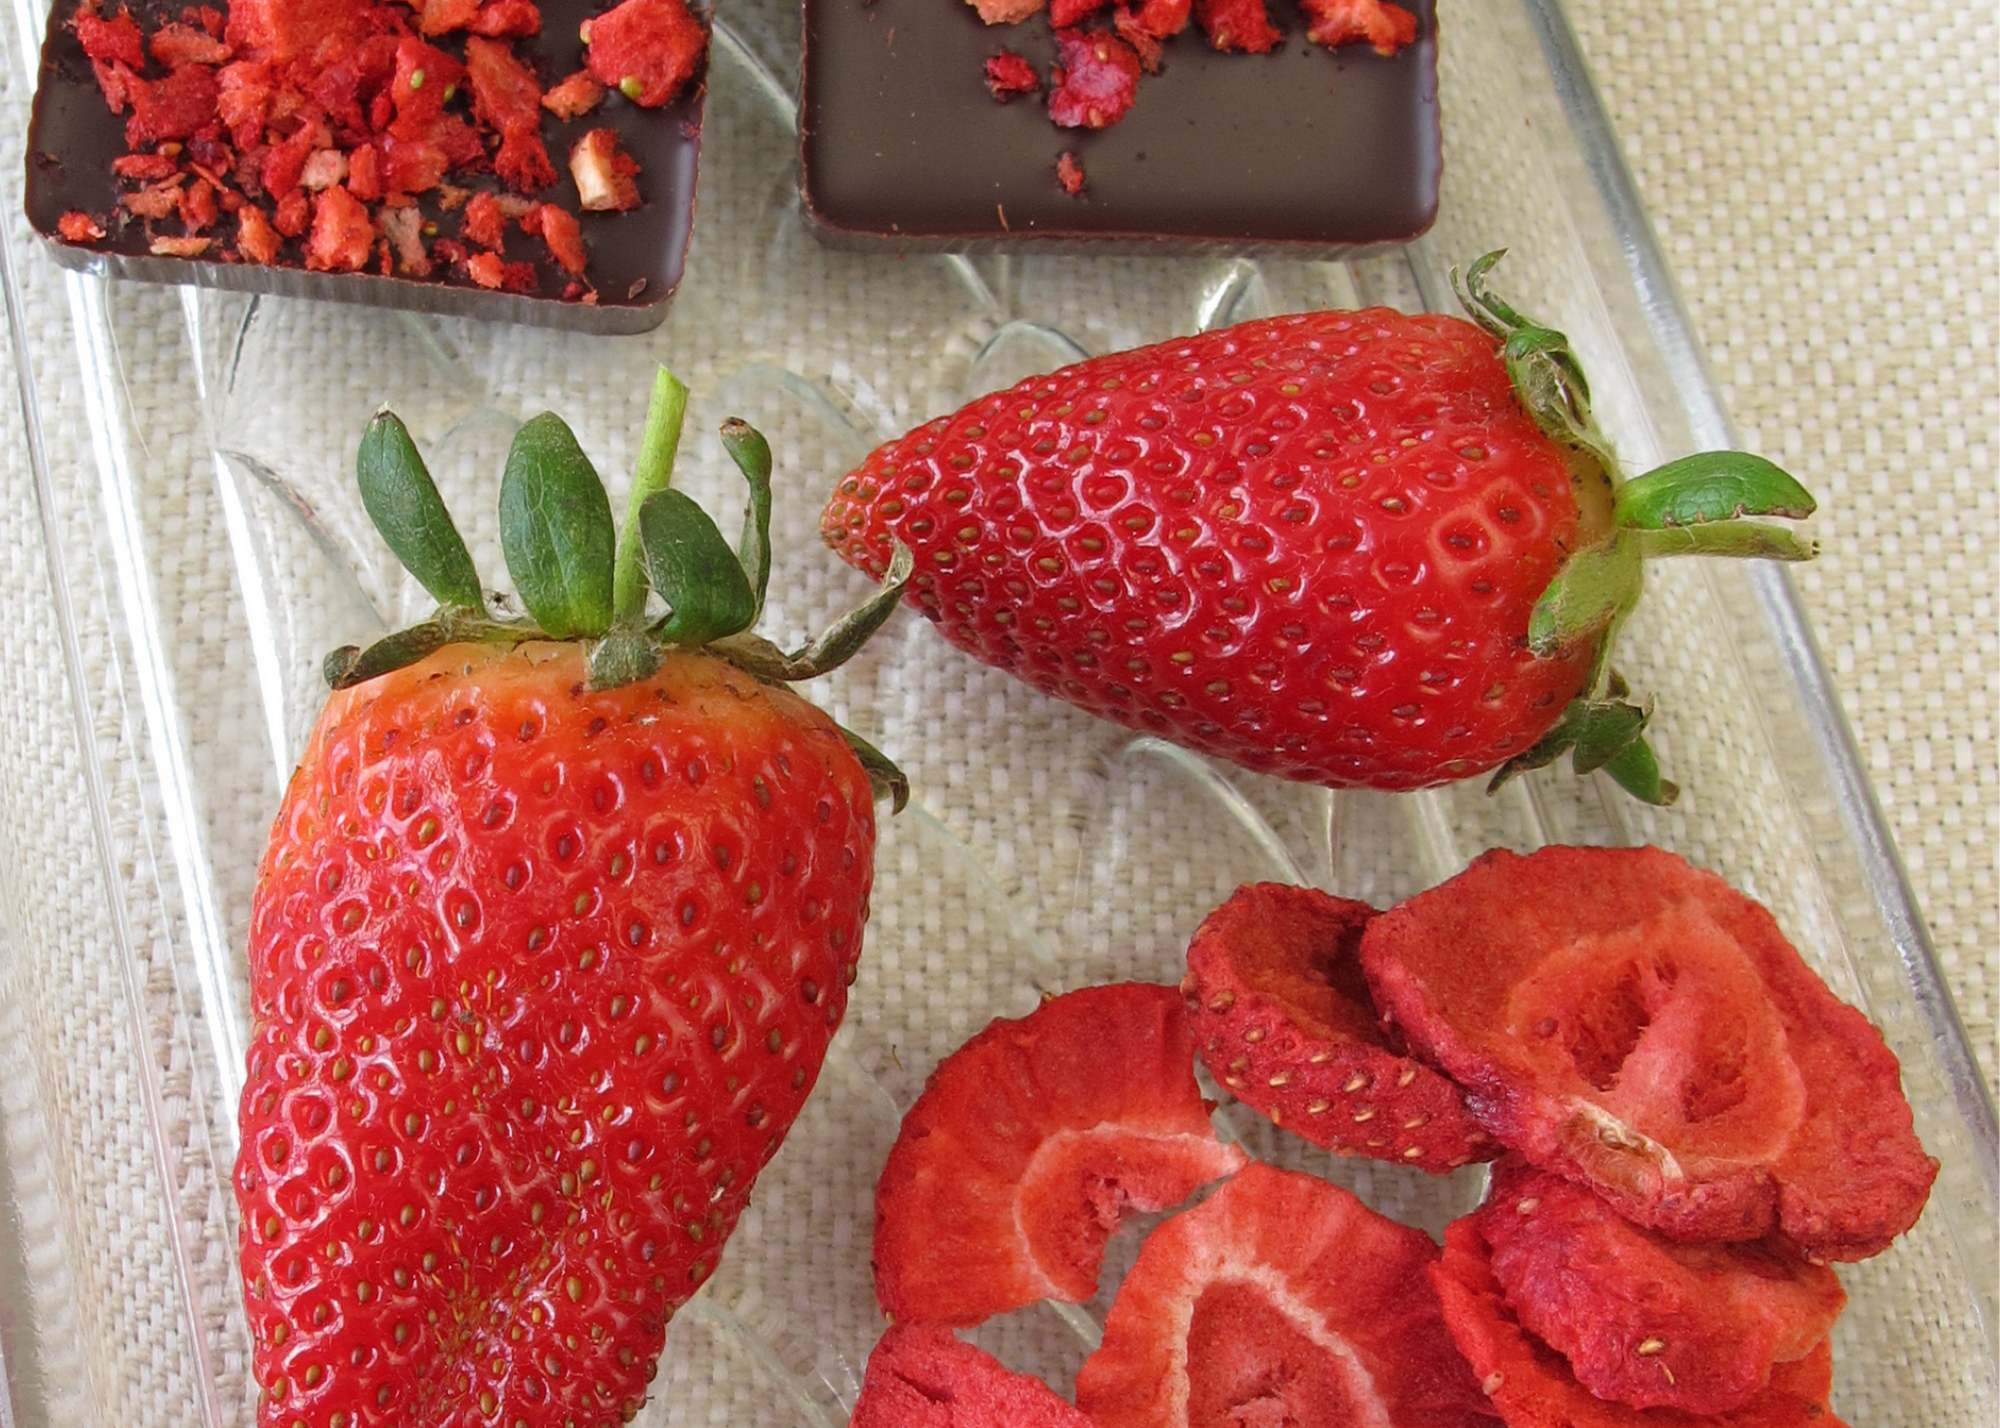 glass serving dish, white table cloth, low calorie snack ideas, strawberries dark chocolate, strawberry dessert